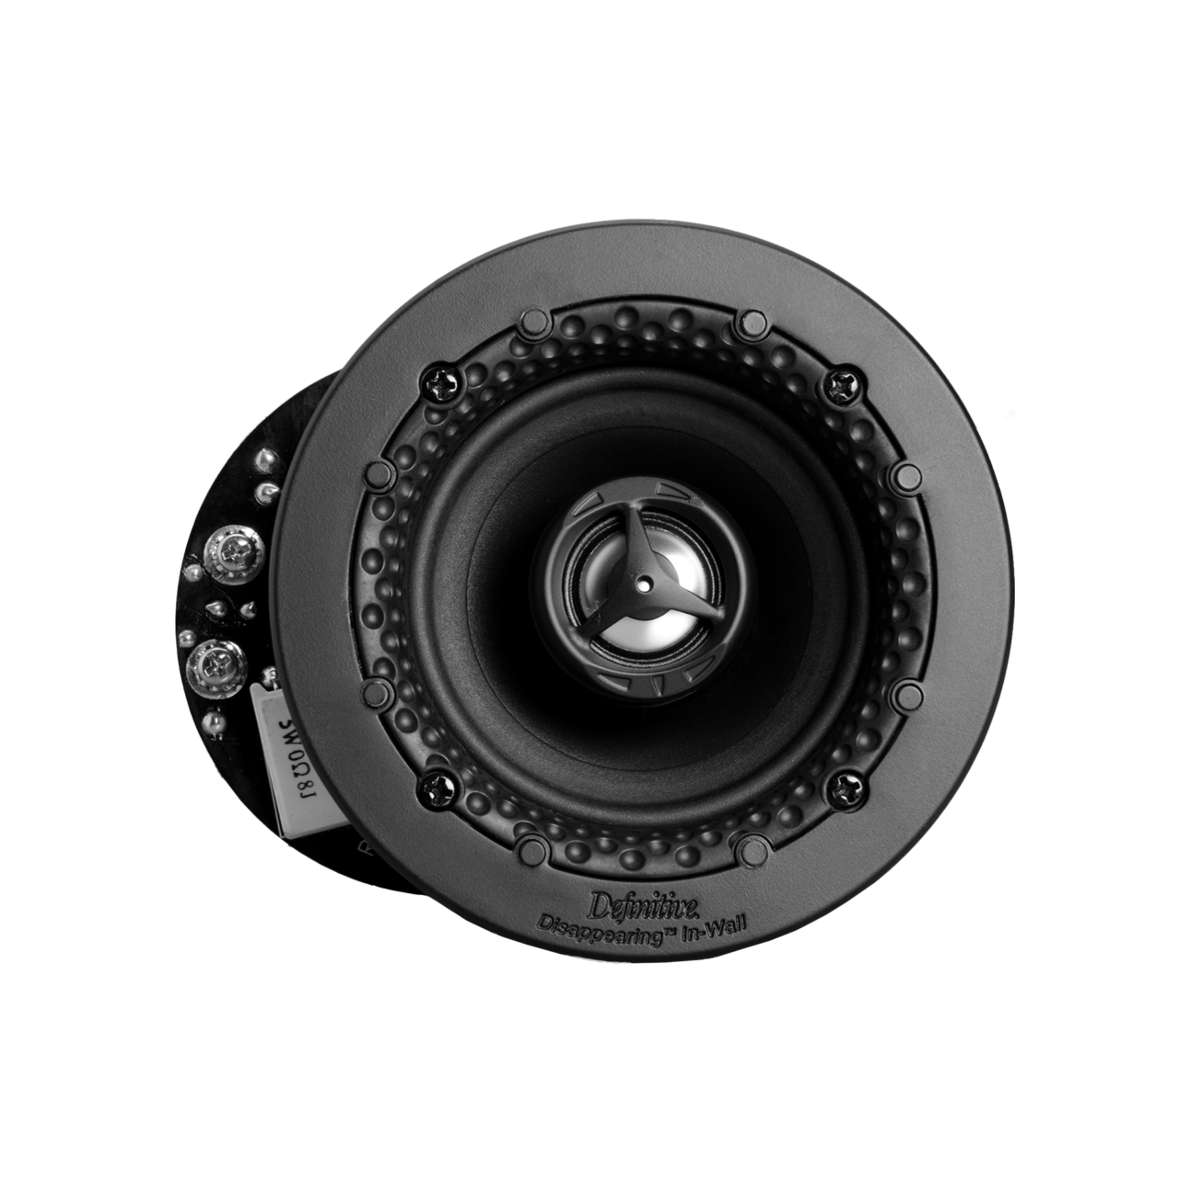 Definitive Technology DI 3.5 R Disappearing™ Series Round 3.5” In-Wall / In-Ceiling Speaker (Each) - Ooberpad